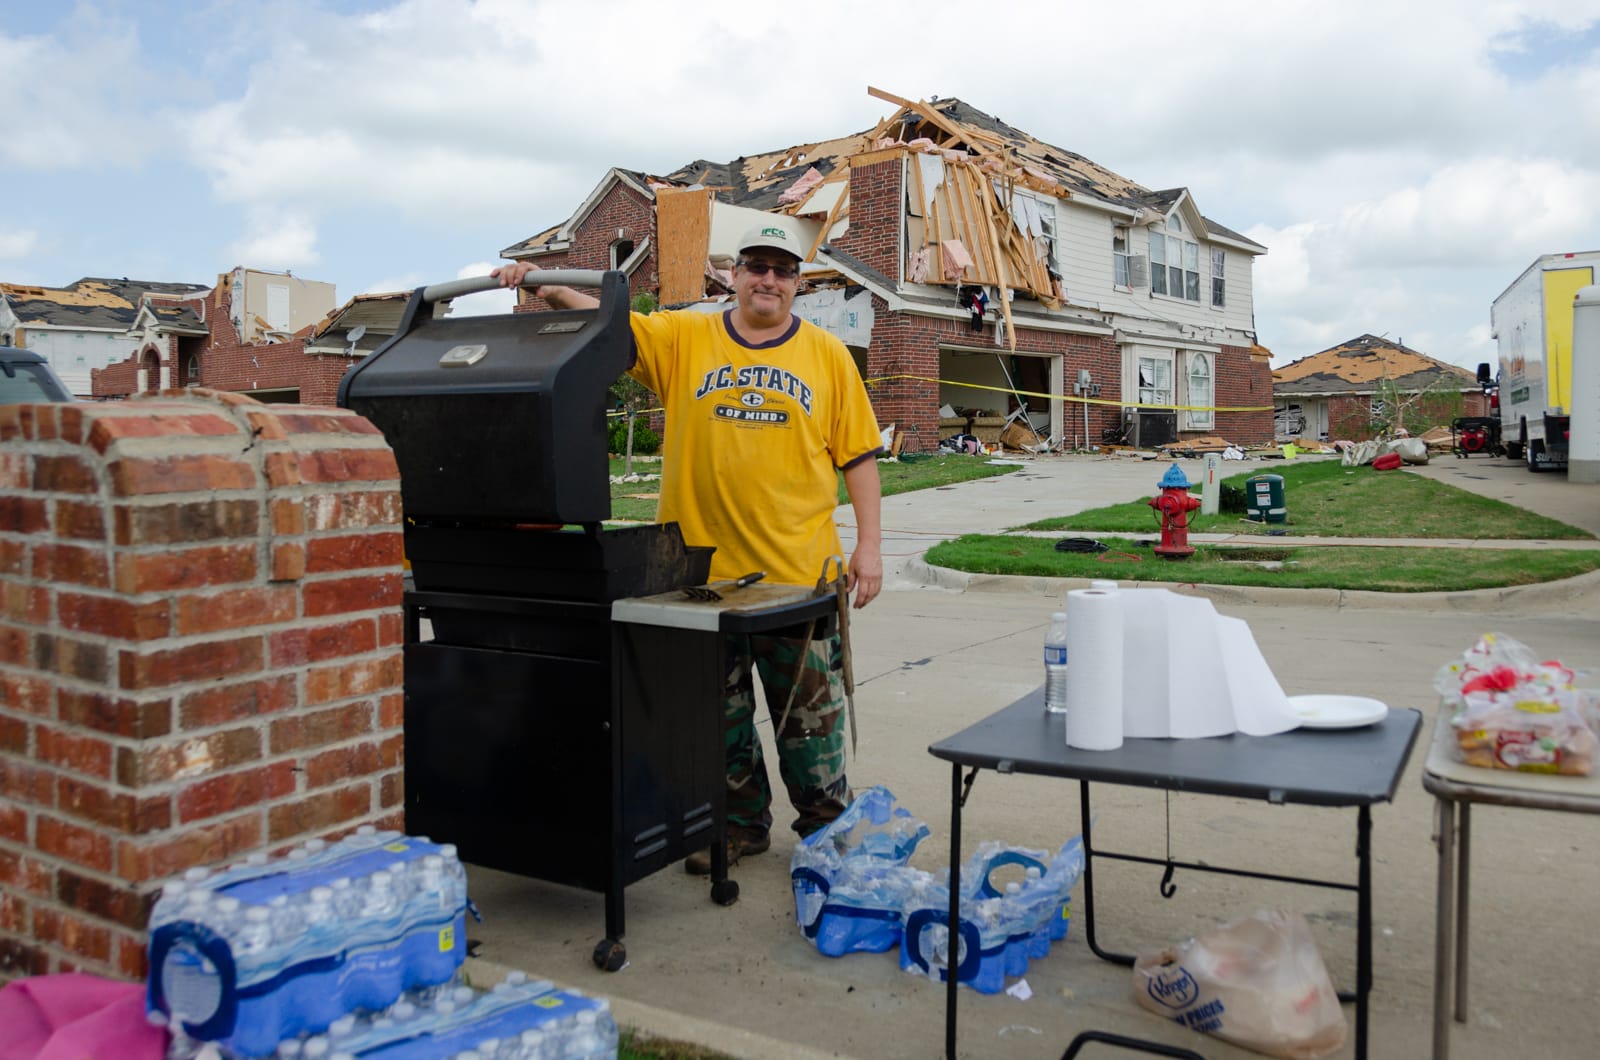 Steve grilling food for people who are cleaning up after their homes were hit by a tornado